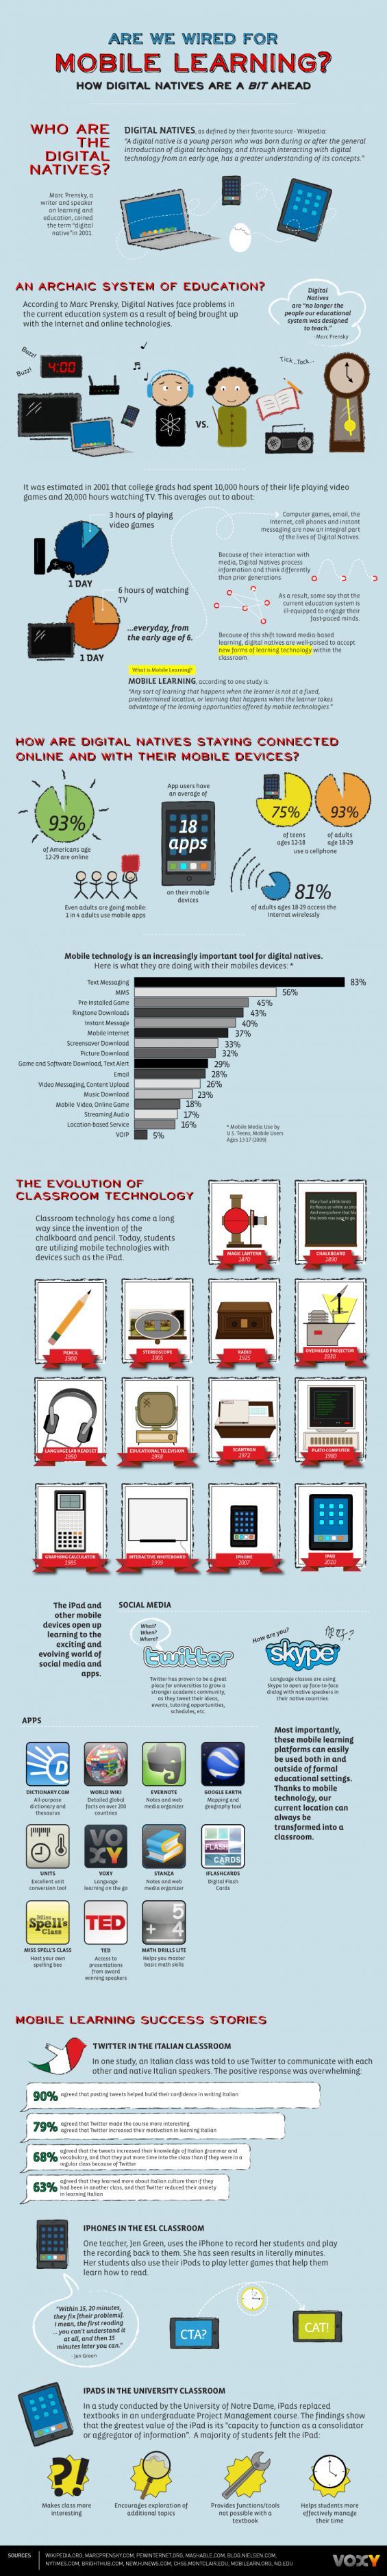 Mobile Learning Infographic How Digital Natives Are A Bit A Head